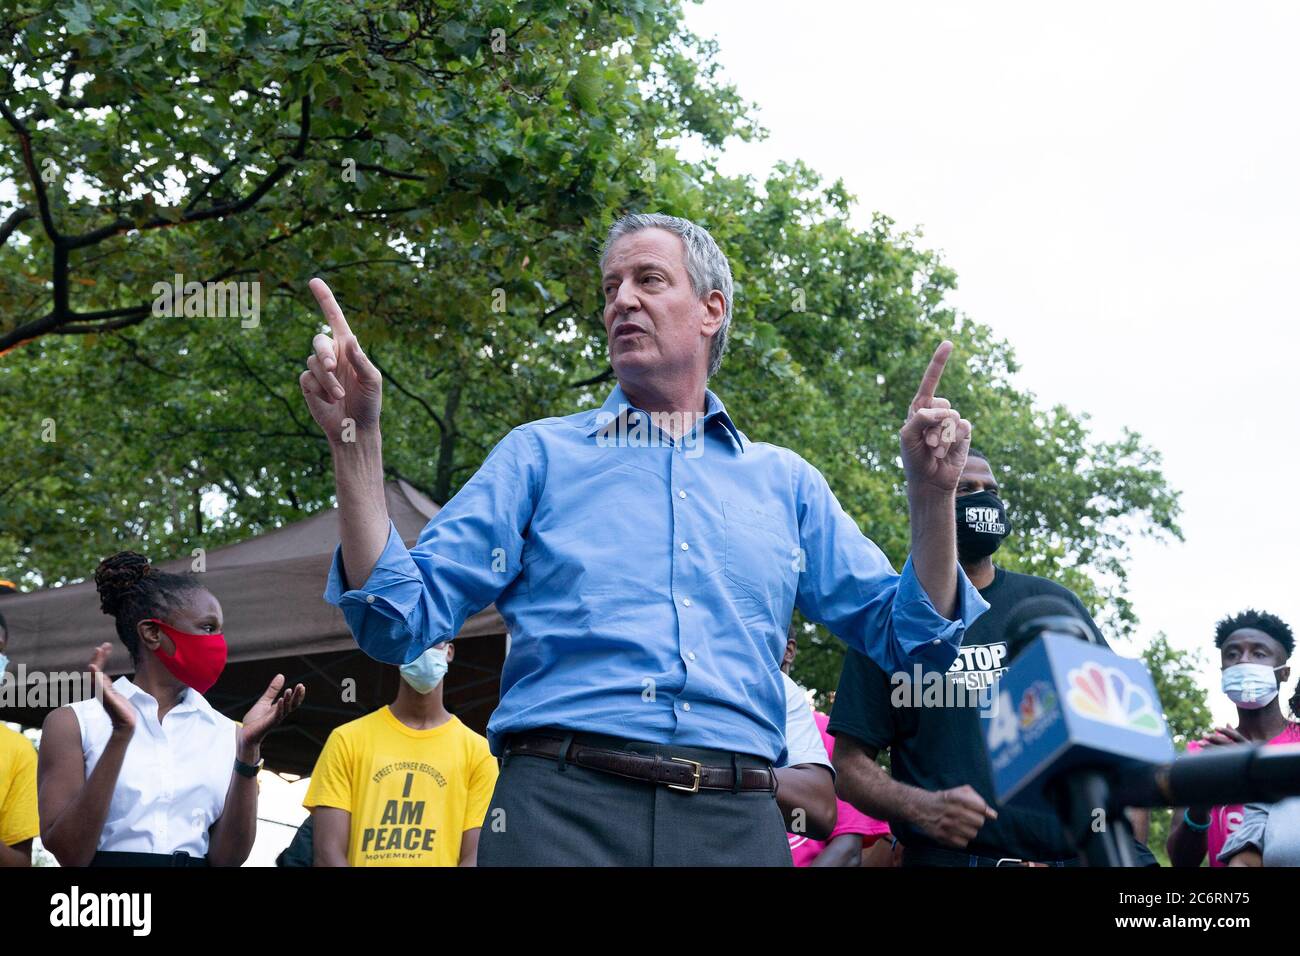 Mayor Bill de Blasio speaks at Occupy the Corner rally in East Harlem in response on gun violence. Gun violence in 2020 surged by more than 100% in New York City mostly in neighborhoods with high rate of poverty and high level of COVID-19 cases. Community activists and police department encreased presence in those areas in order to stop gun violence. Organizers of Occupy the Corner rally invited mayor de Blasio, police chief Jeffrey Maddrey, NYS Senator Brian Benjamin and activists to participate. (Photo by Lev Radin/Pacific Press) Stock Photo